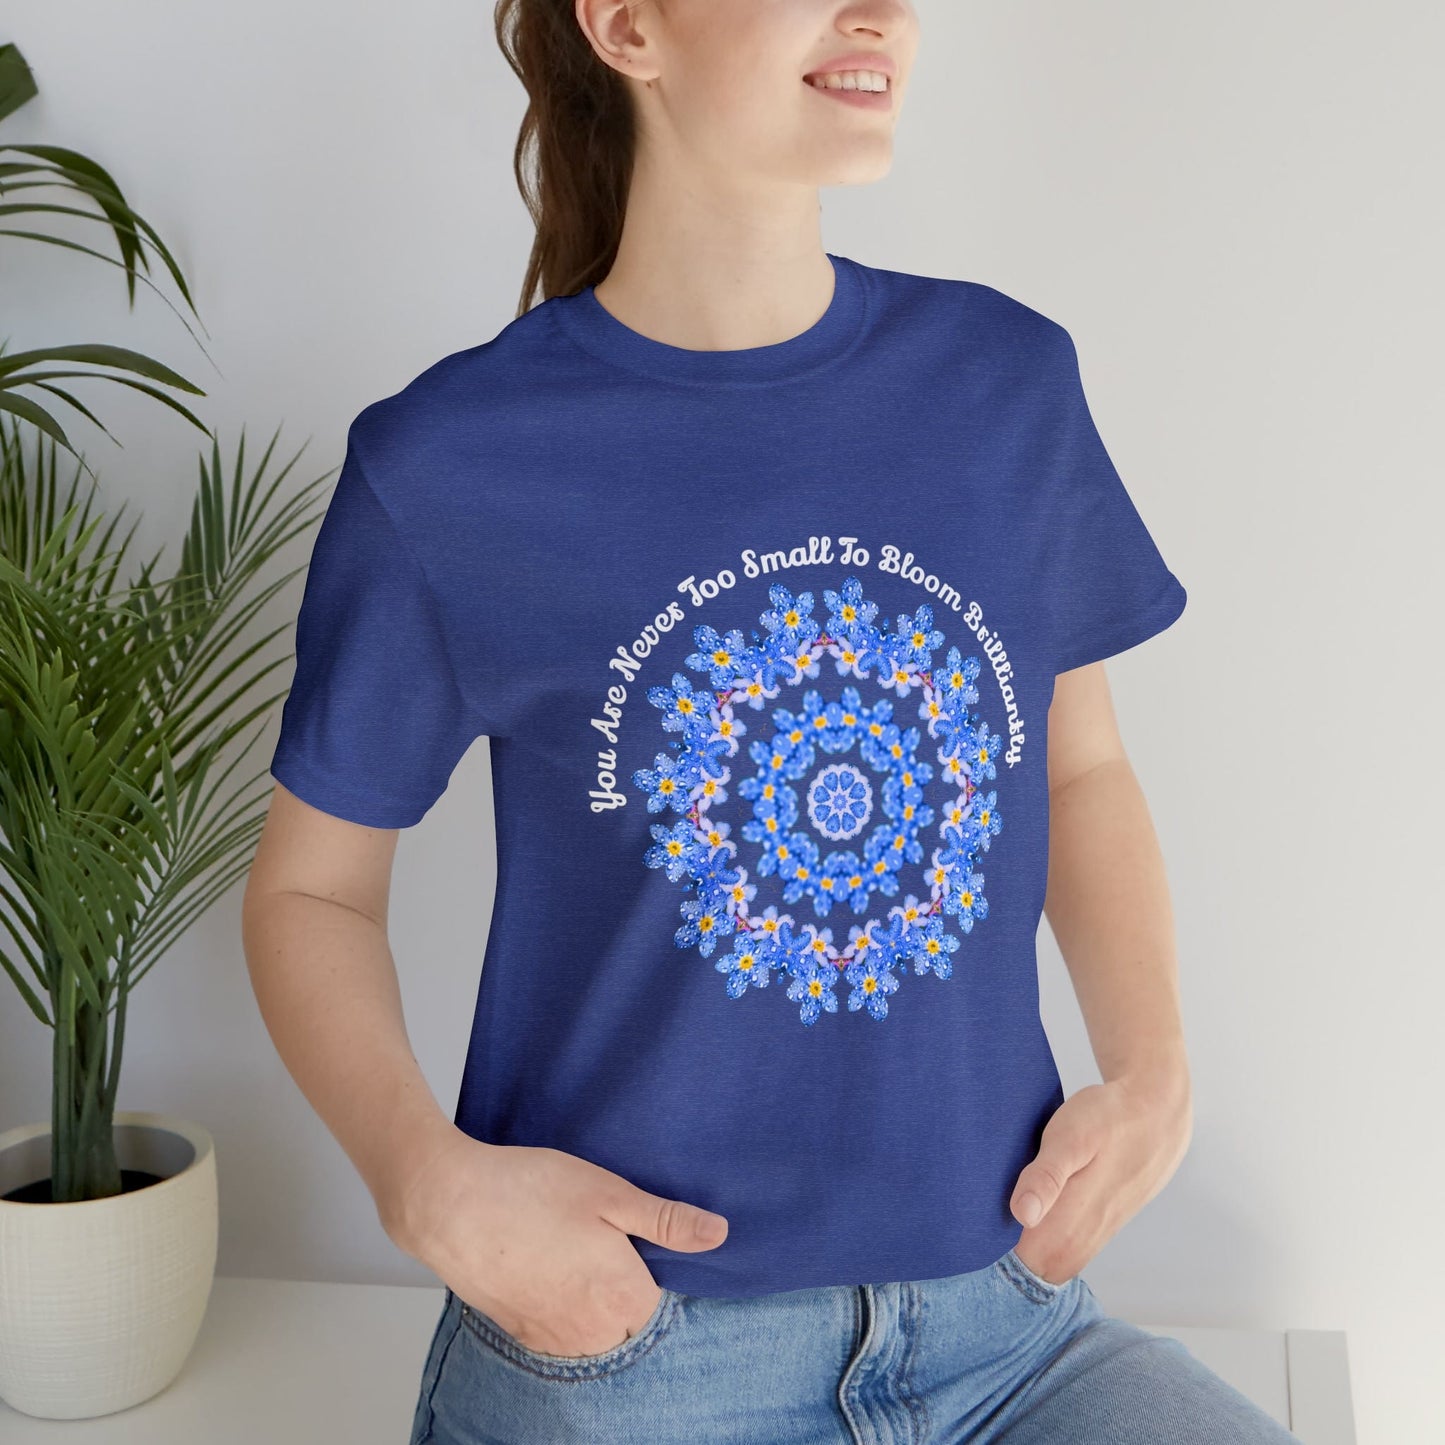 Forget Me Not Wild Flower Shirt, Kindness Motivational - Your Are Never Too Small To Bloom Brilliantly